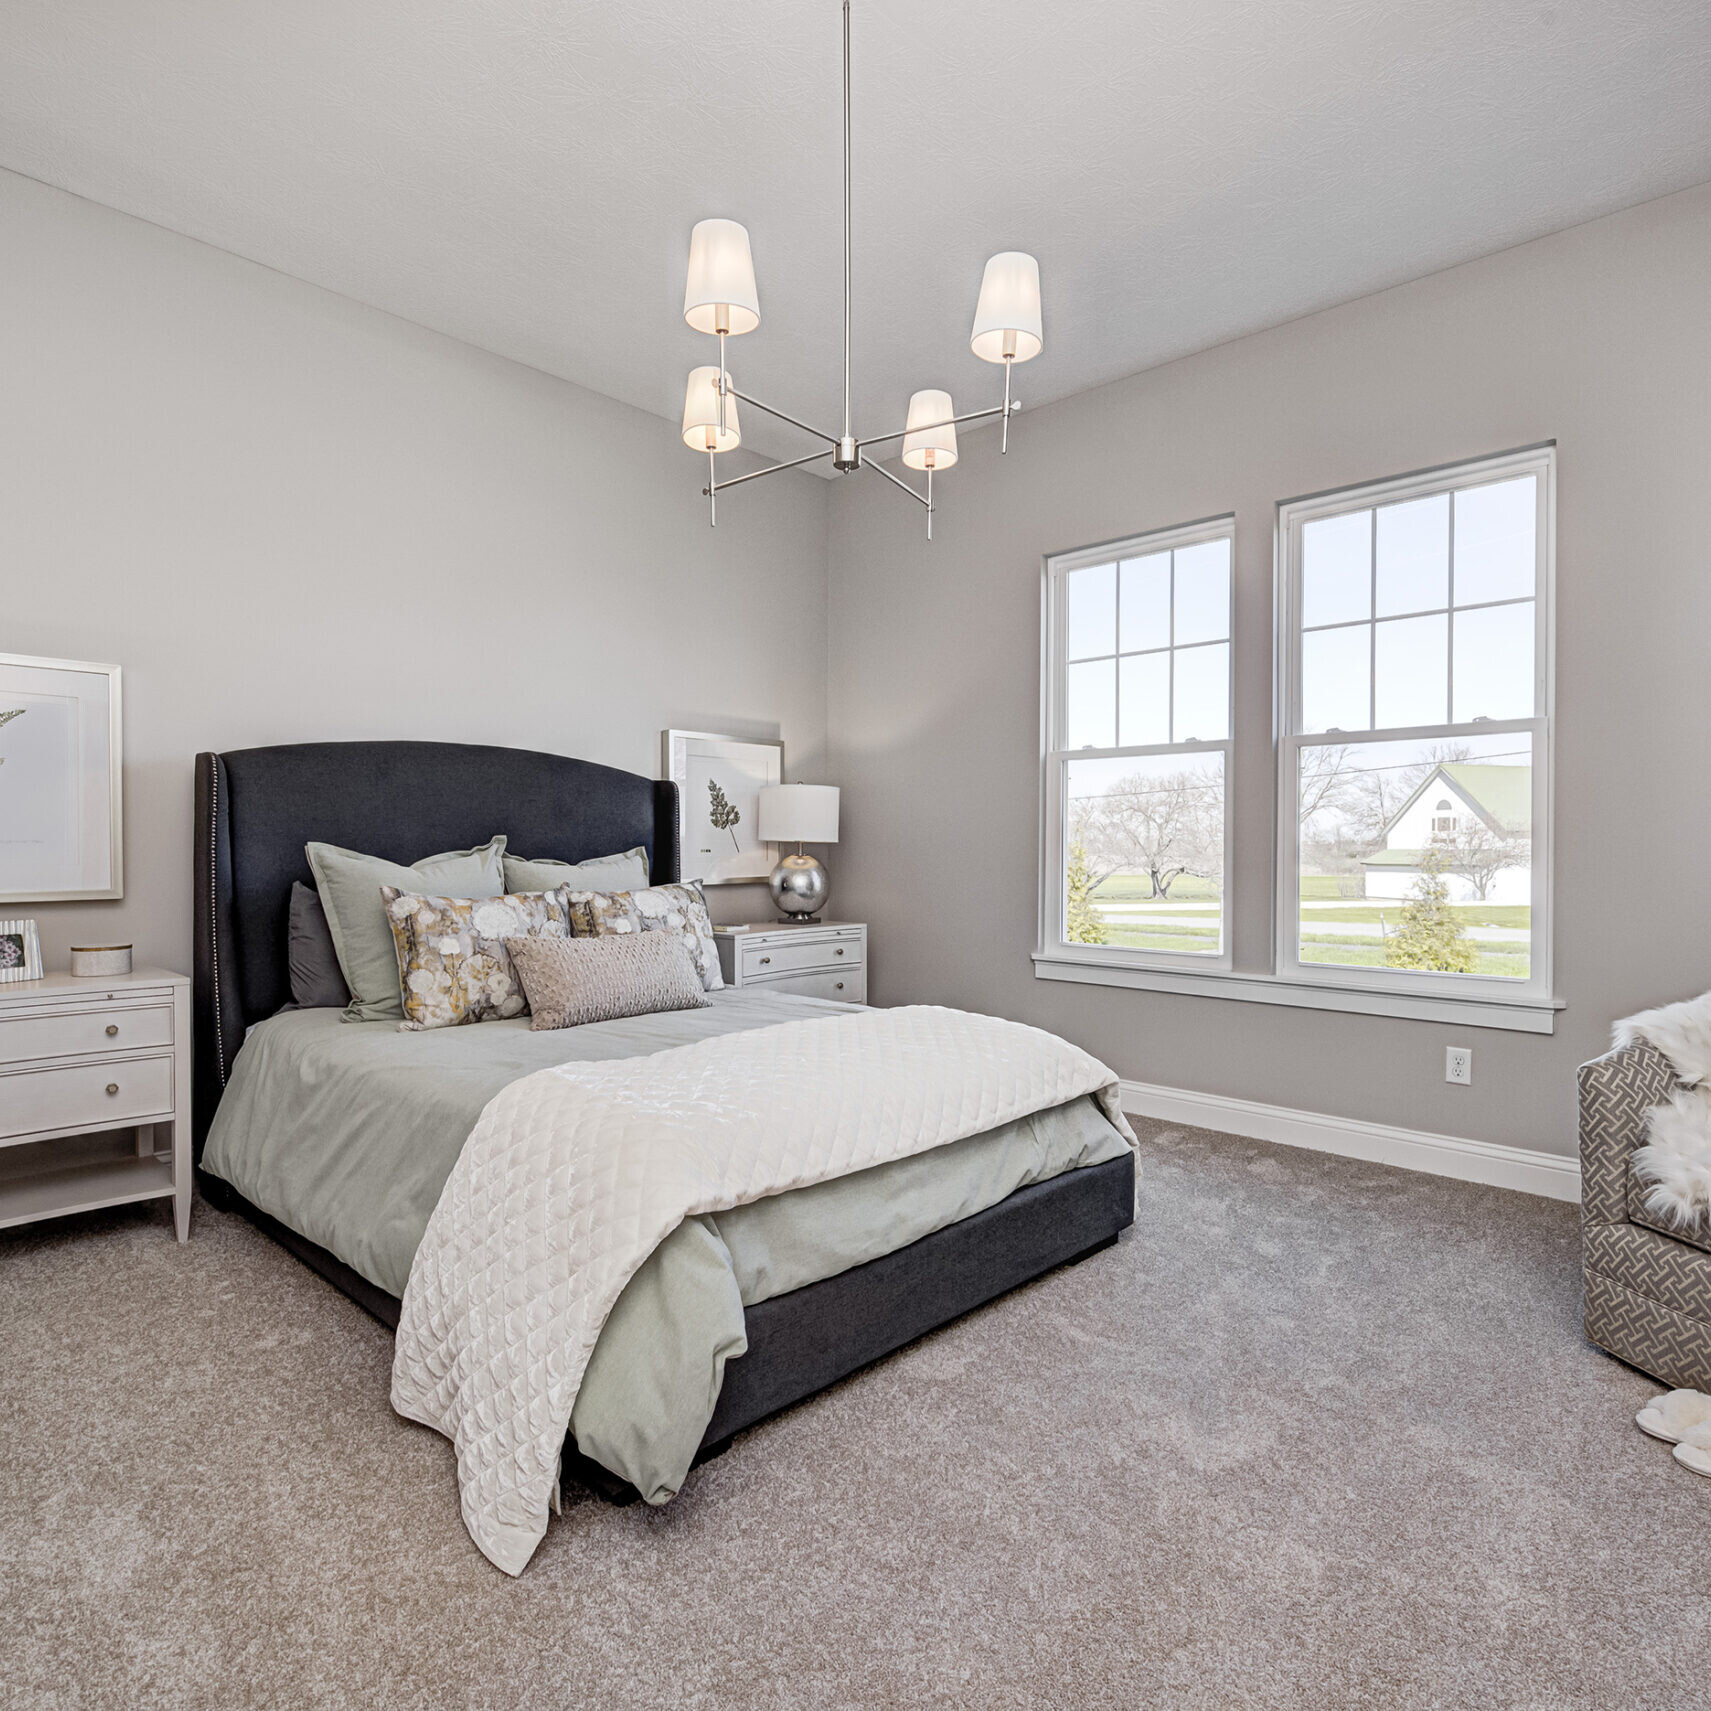 A bedroom with a bed and a dresser, designed by a custom home builder in Carmel Indiana.